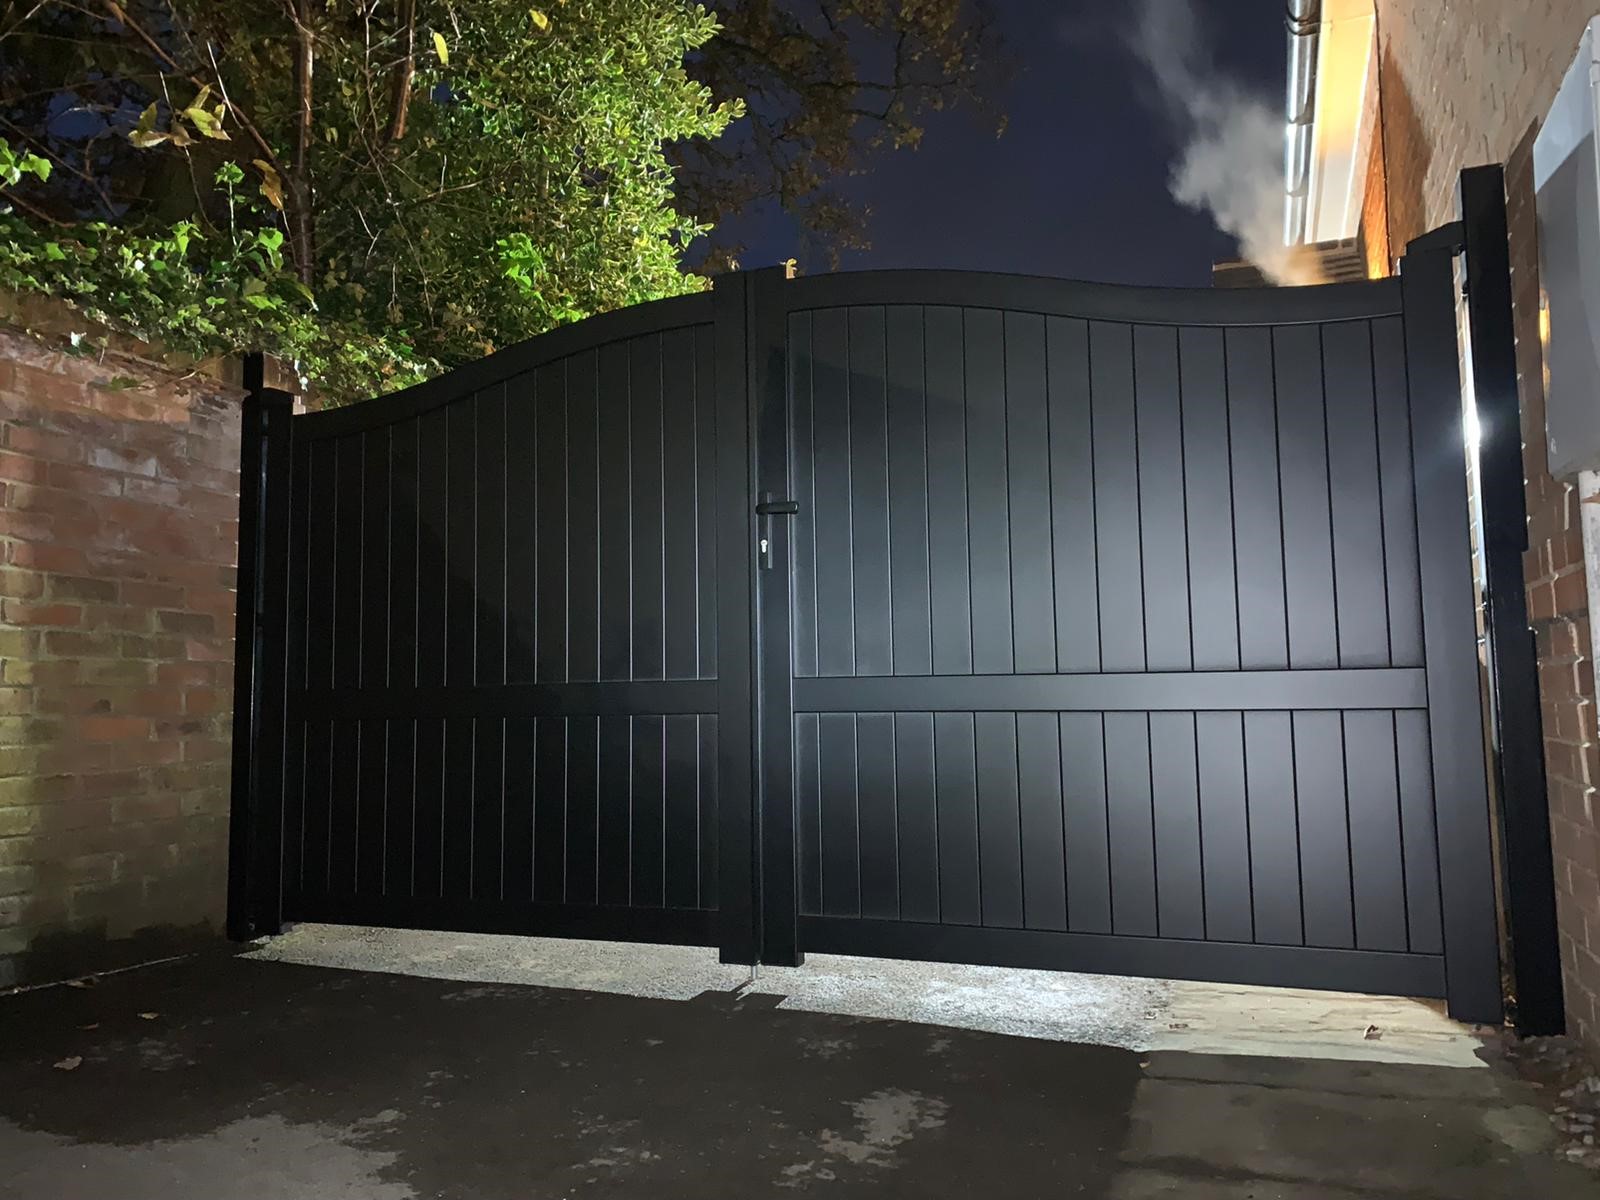 Readymade Black Aluminium Bell Curved Top Double Swing Driveway Gate - 3750mm Width